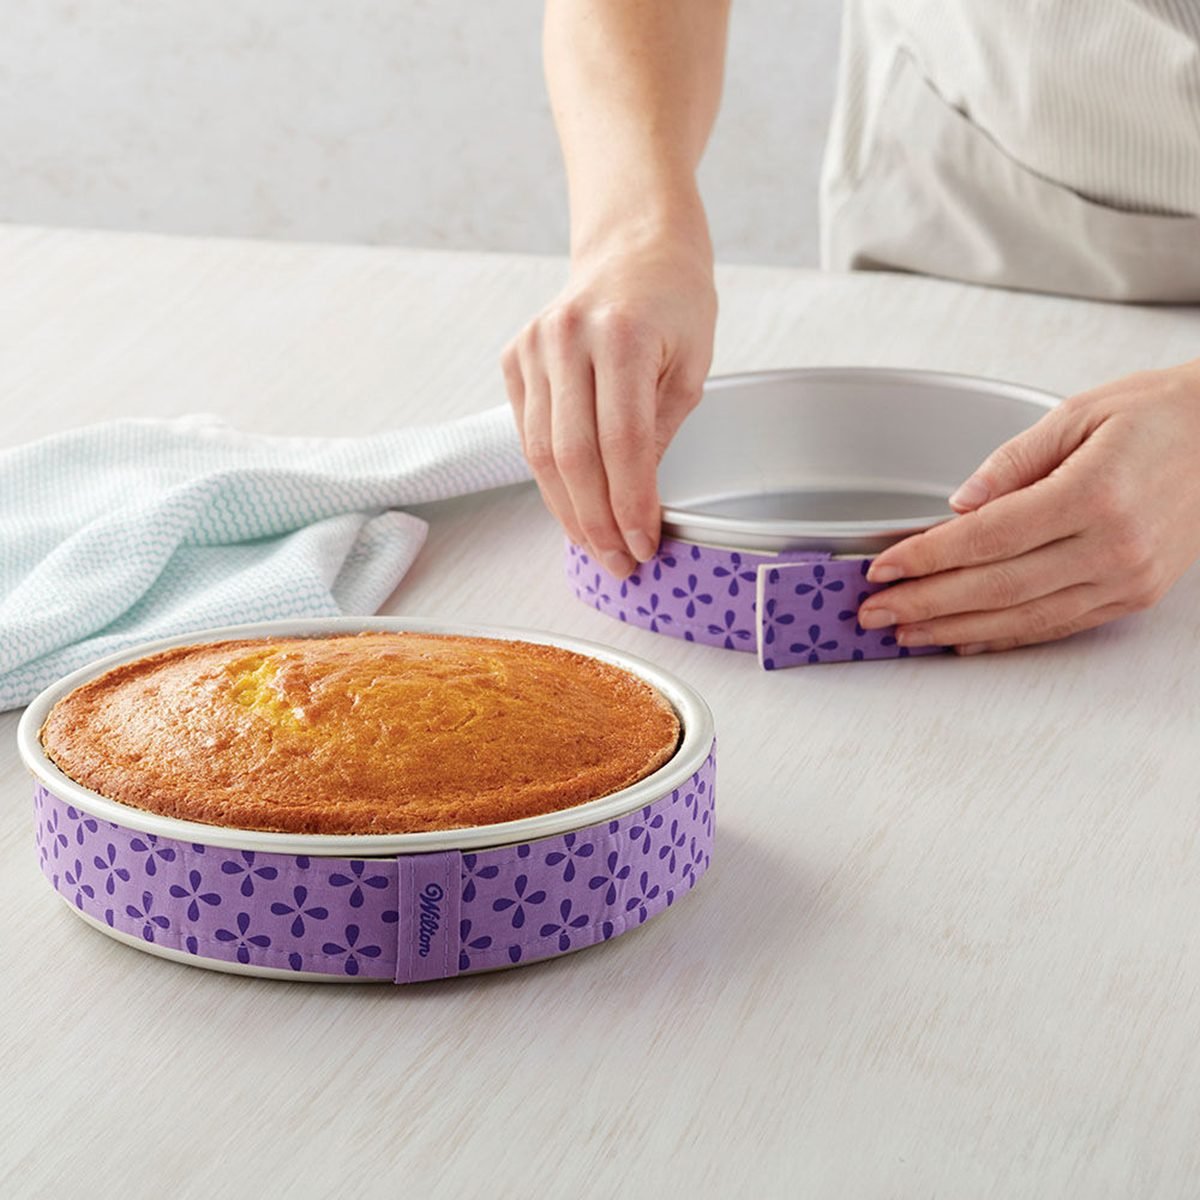 Cake Pans - How To Cooking Tips 